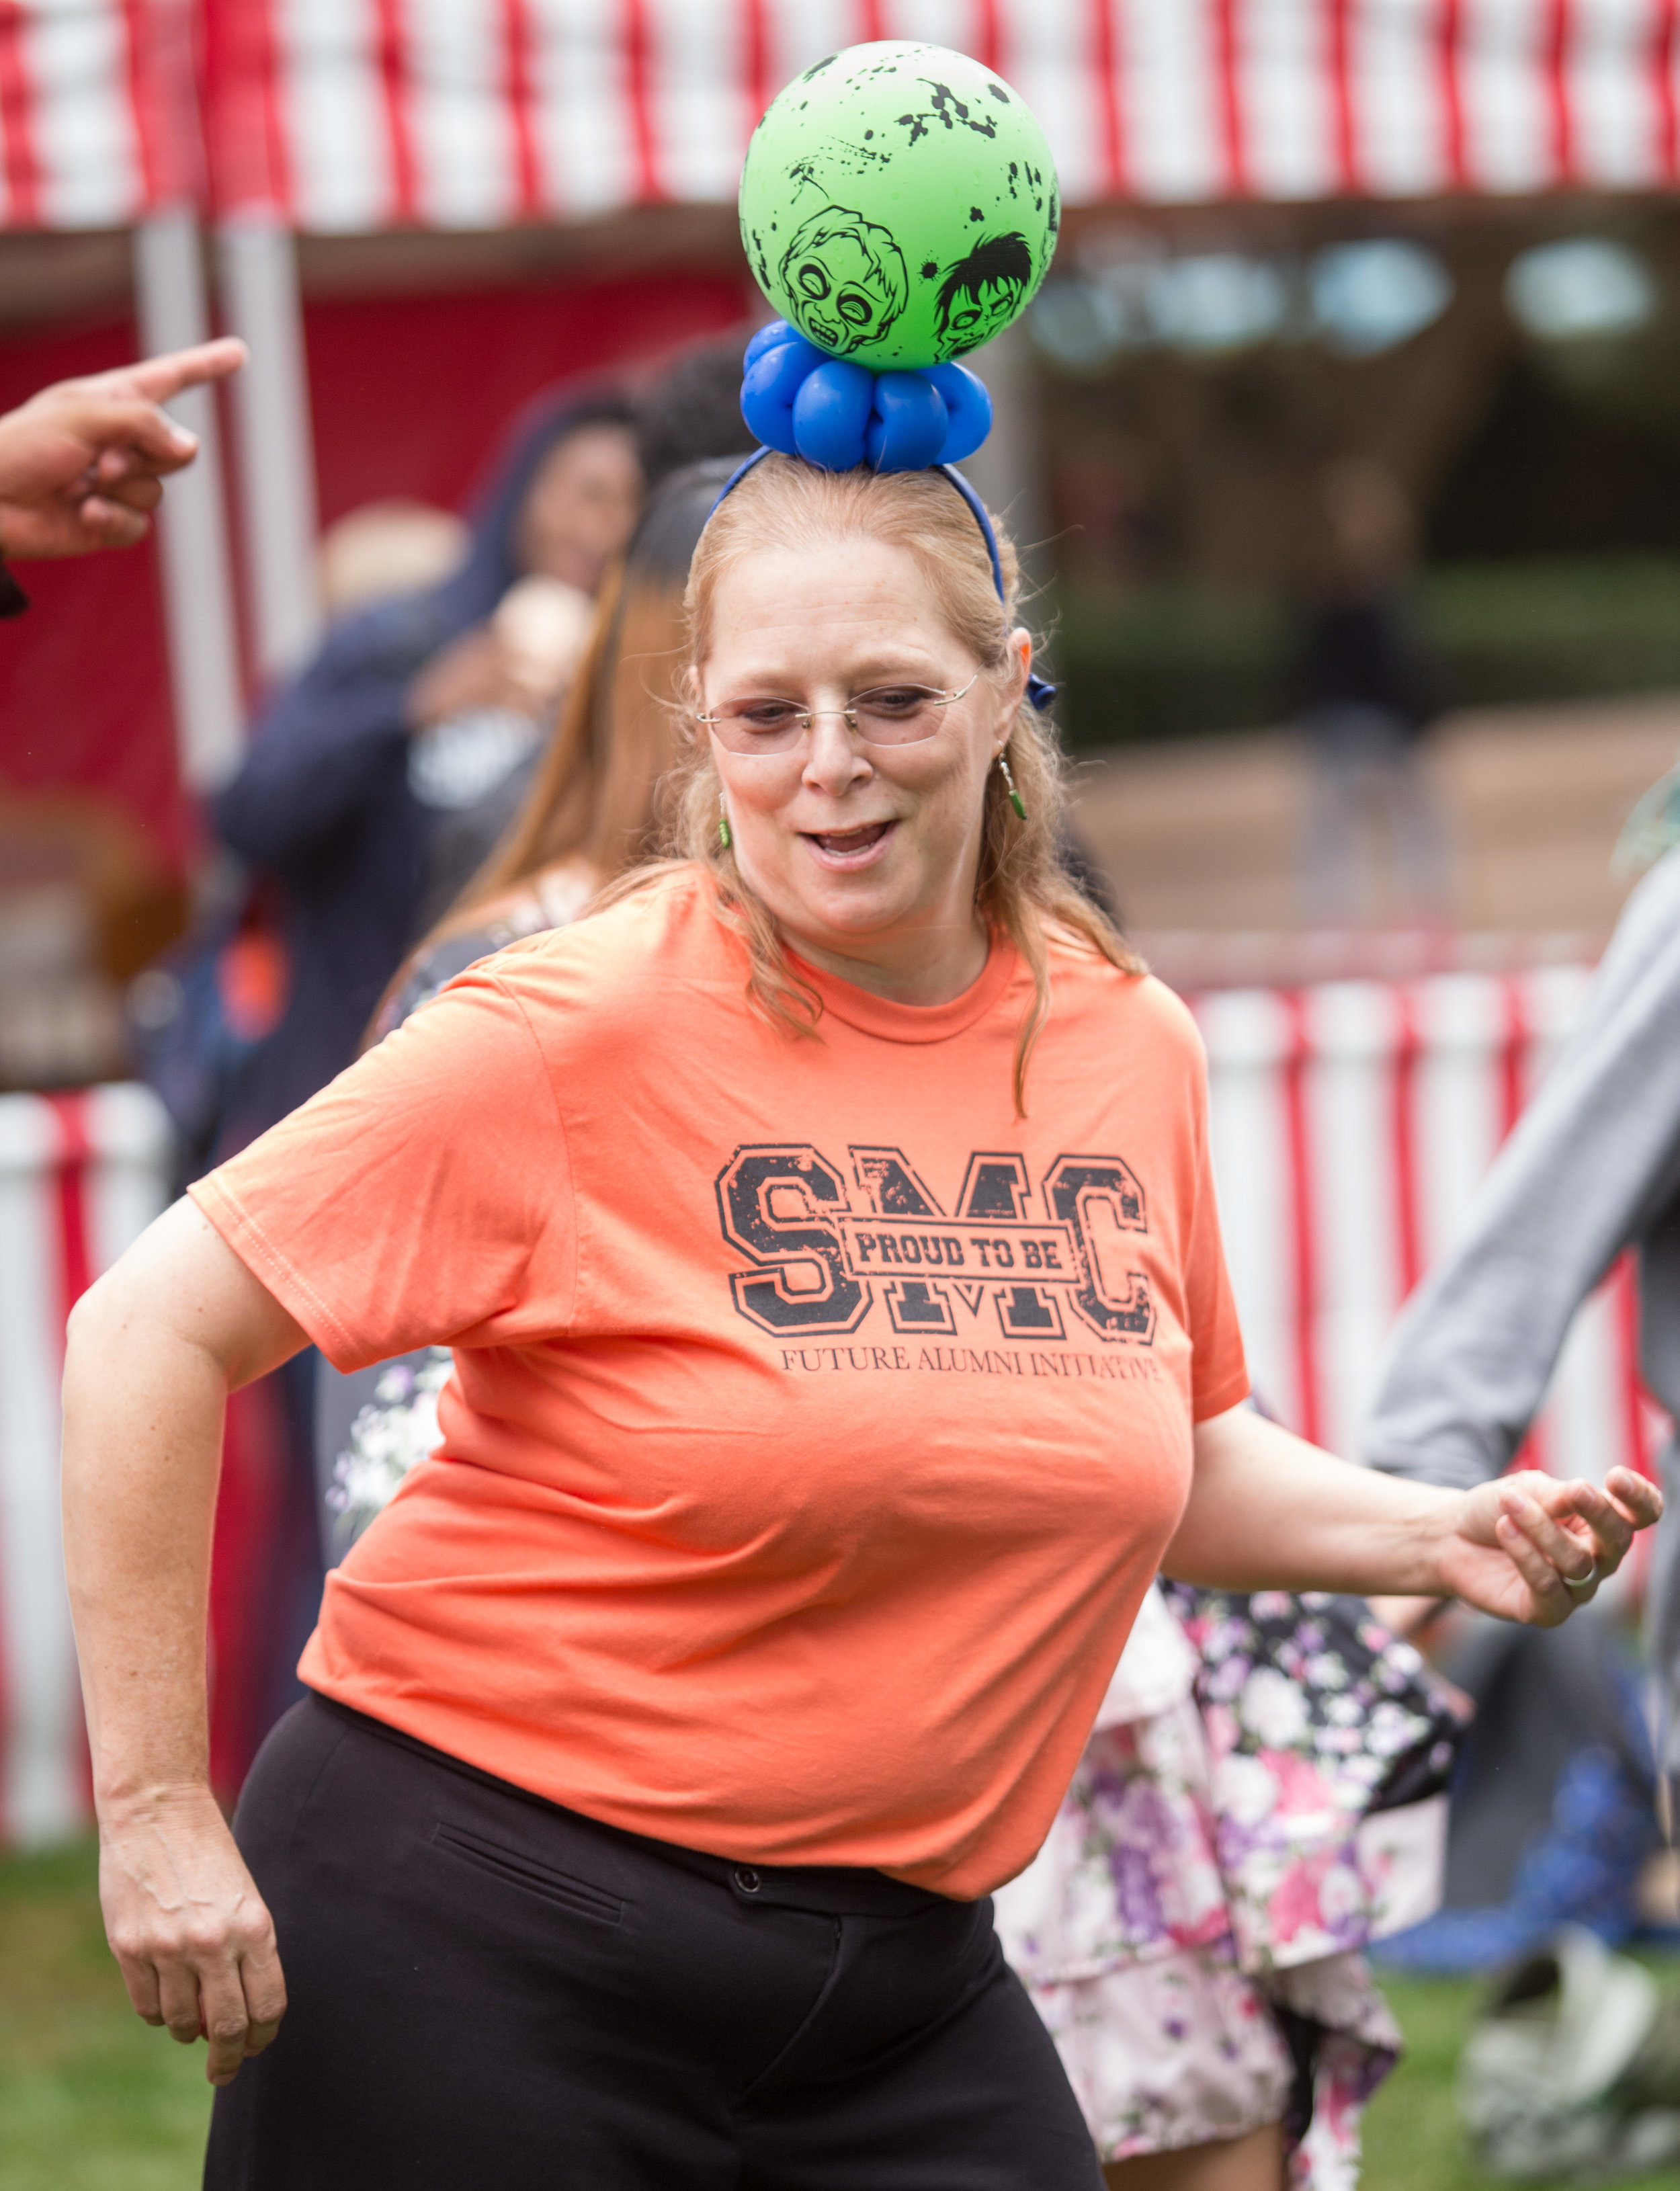  Dr. Nancy Grass Associate Dean, Student Life dances to the song "Cupid Shuffle" by R&B artist Cupid on the Santa Monica College's Main Campus Quad for the Associated Students' Homecoming Carnival on Halloween on Tuesday, October 31st 2017 (Photo by: